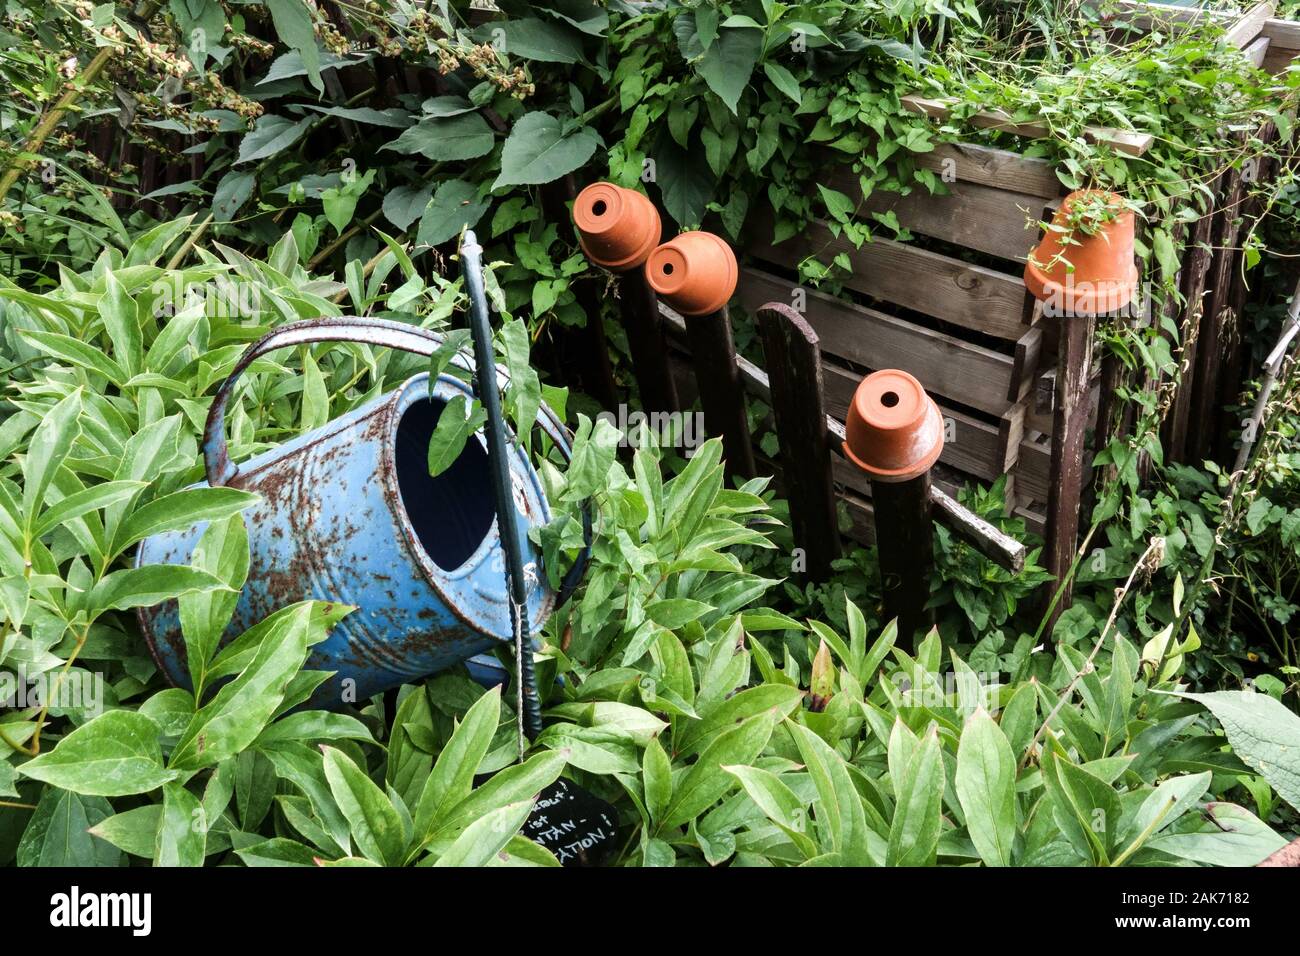 Overgrown garden, water can, flower pots on fence, wooden composter Stock Photo